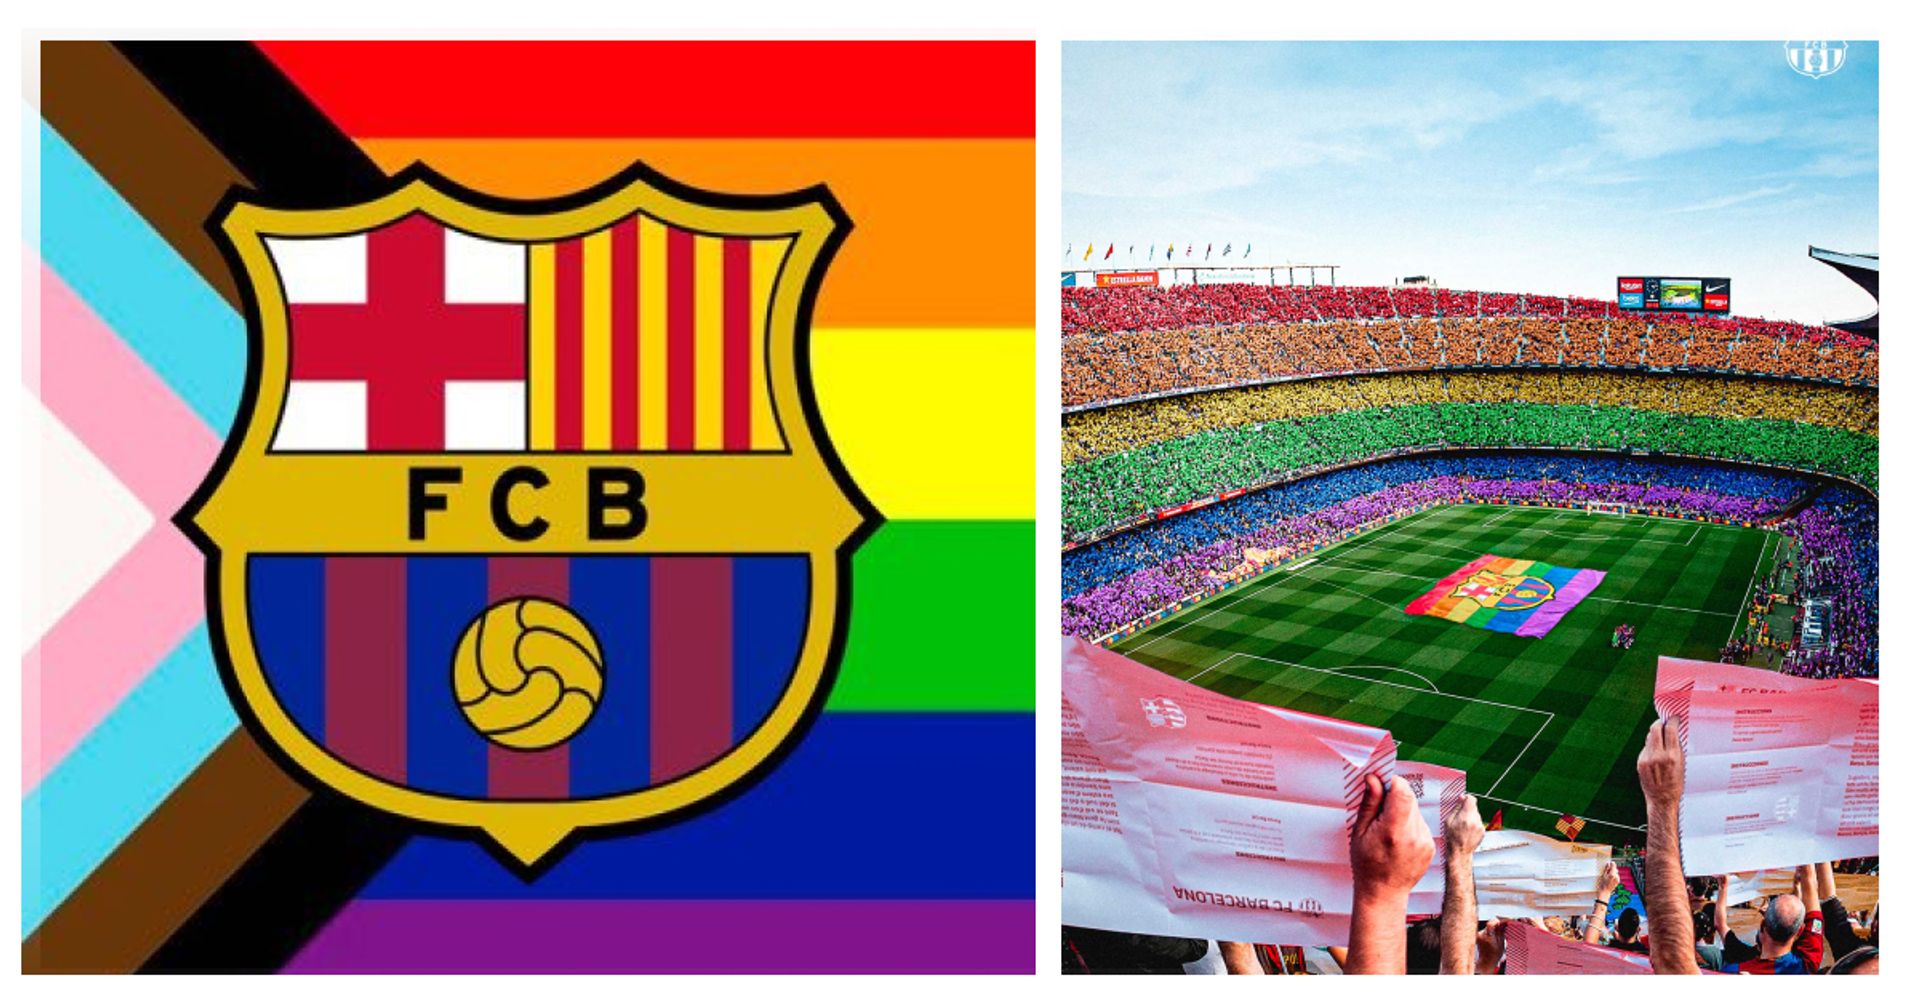 Find another club if you have a problem with a pride flag'; 'unfortunate to  support a gay club': Barca fans have mixed reactions to LGBT flags at Camp  Nou - Football